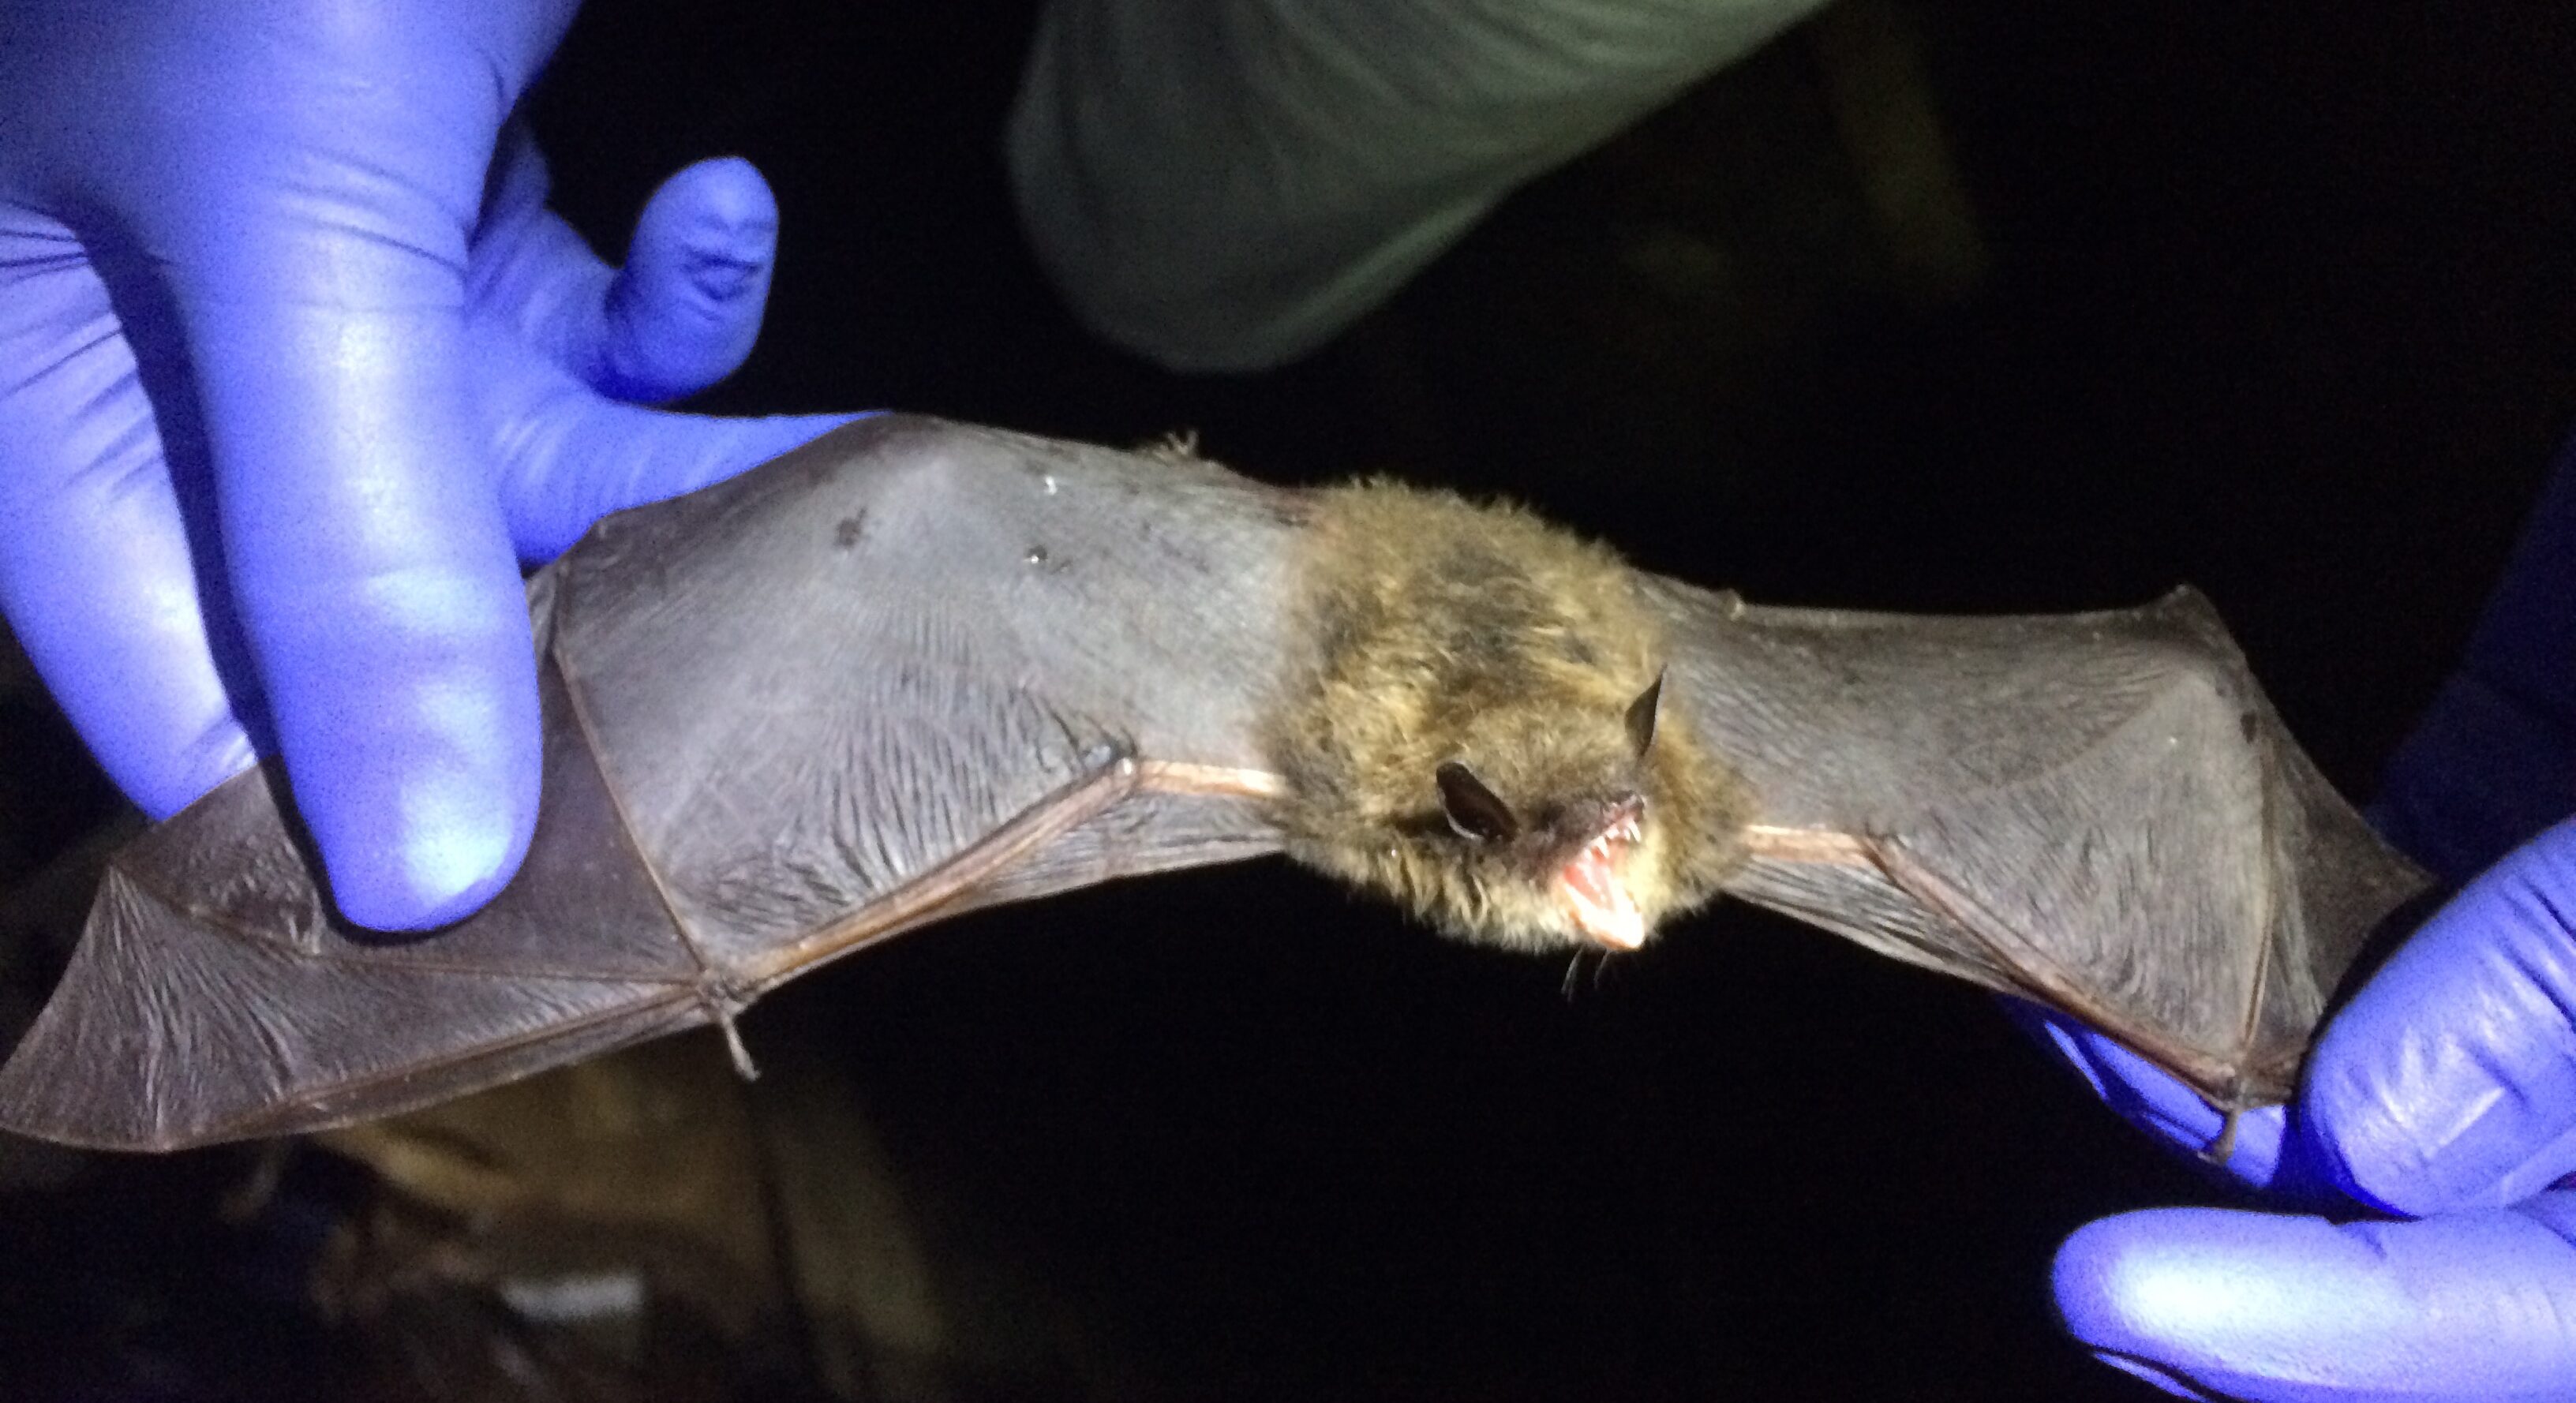 Two hands with purple gloves hold one of the New York brown bats with wings outstretched